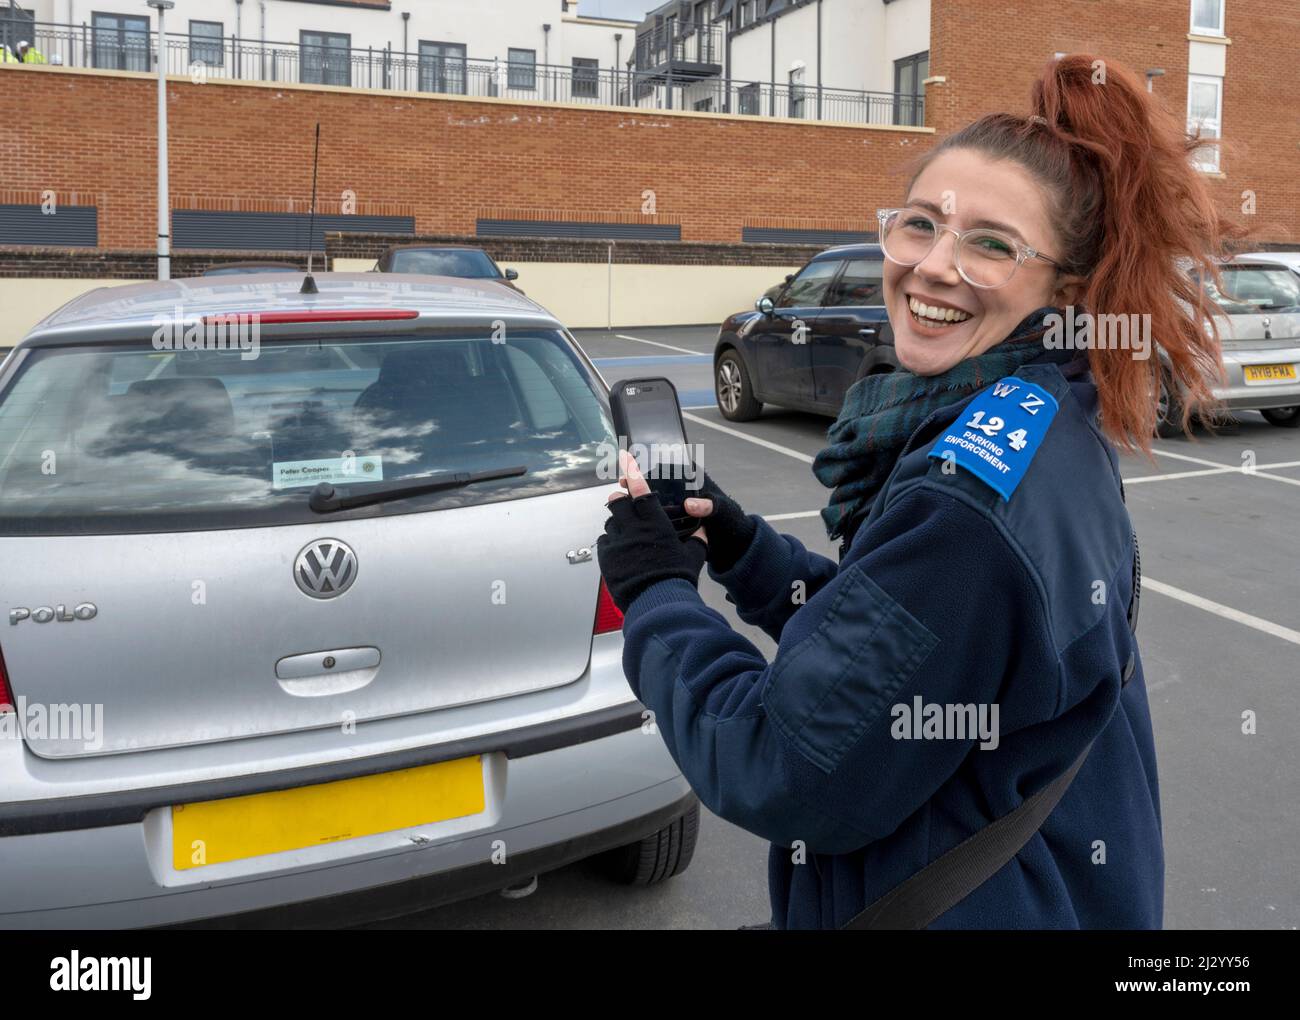 Happy at work, a parking enforcement officer at work in a car park, Farnham, Surrey, England, UK. Stock Photo